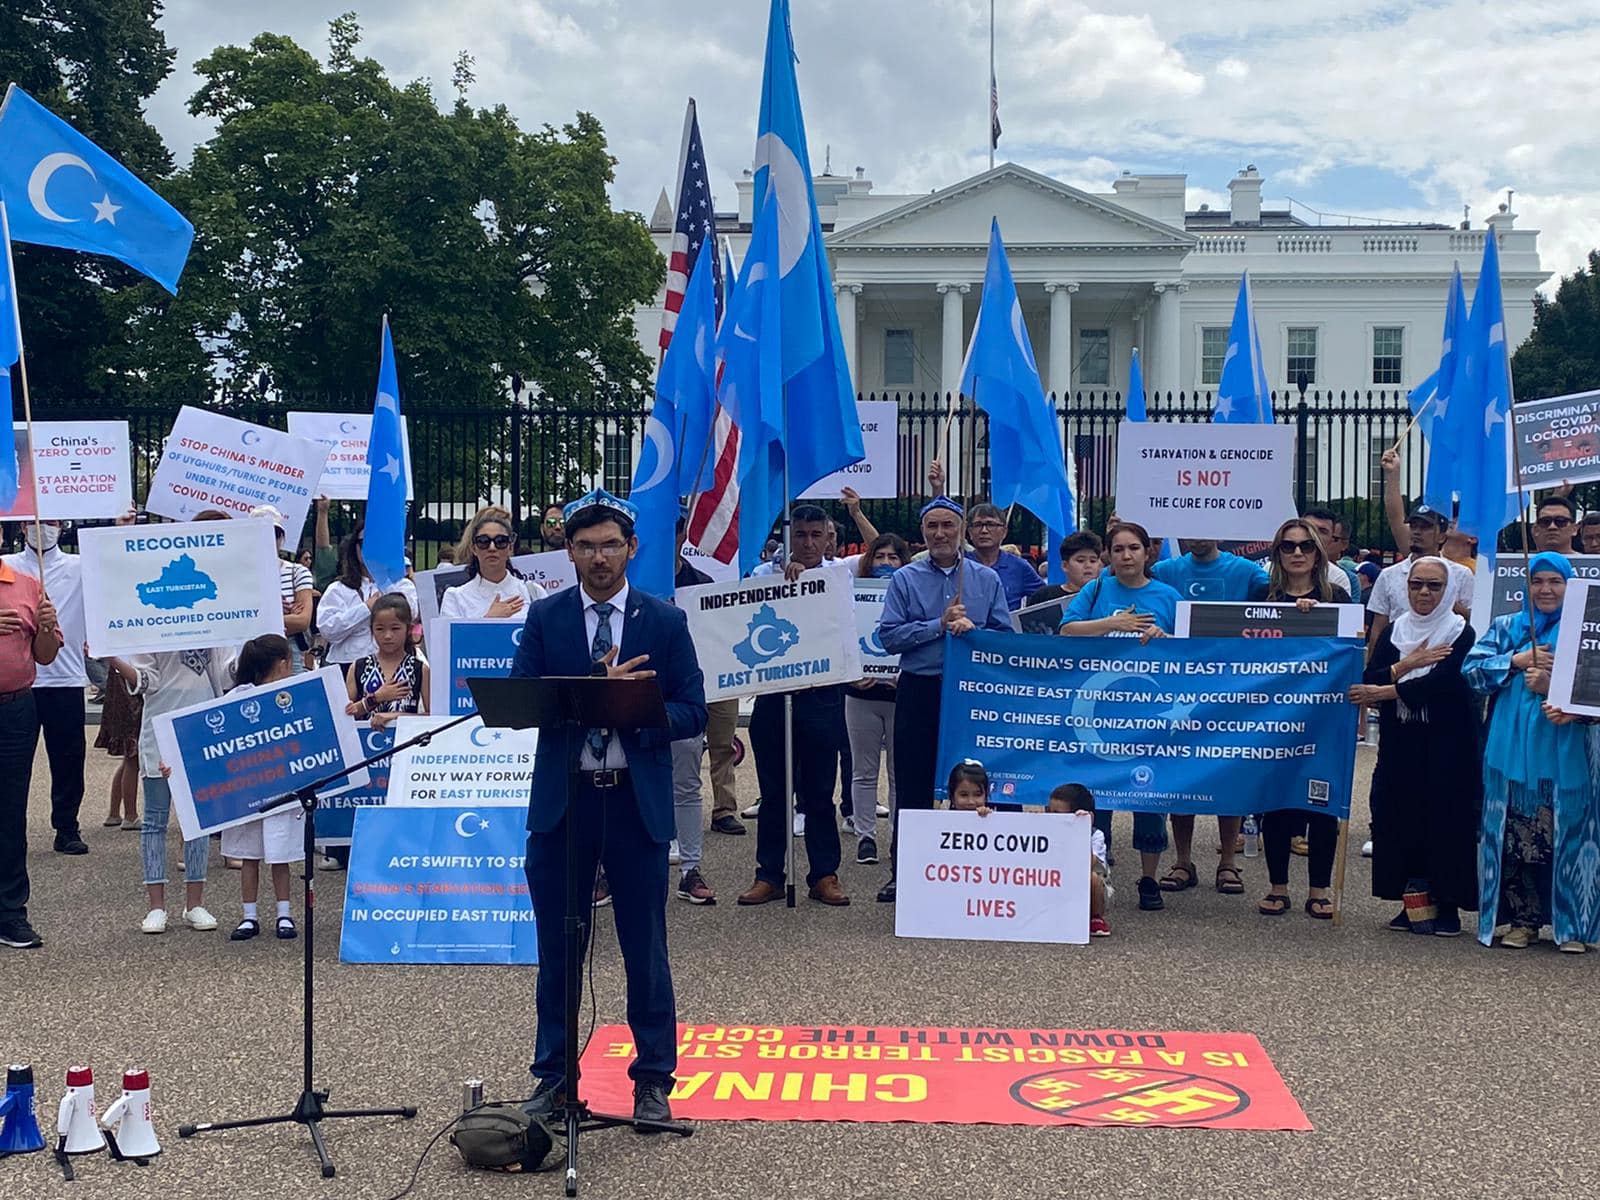 CHINA UPDATE: Uyghurs to Protest Deaths in Urumchi Fire